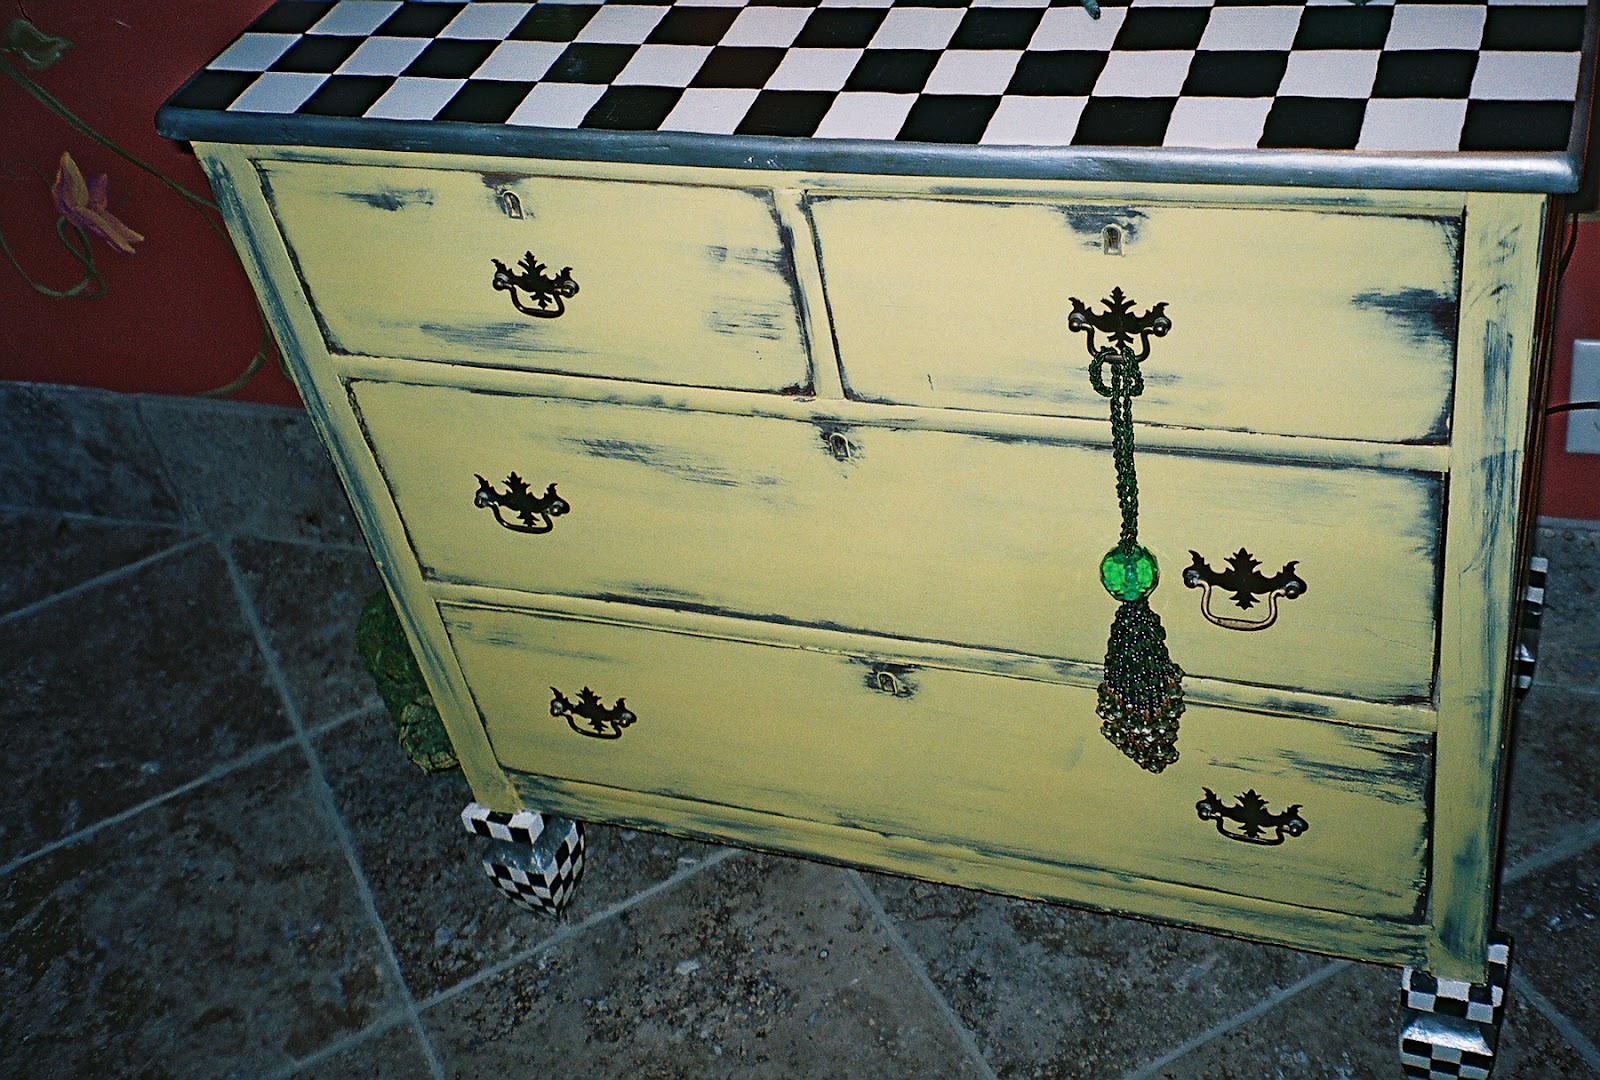 28 Painted Yellow Dresser 23 Expressive Yellow Painted